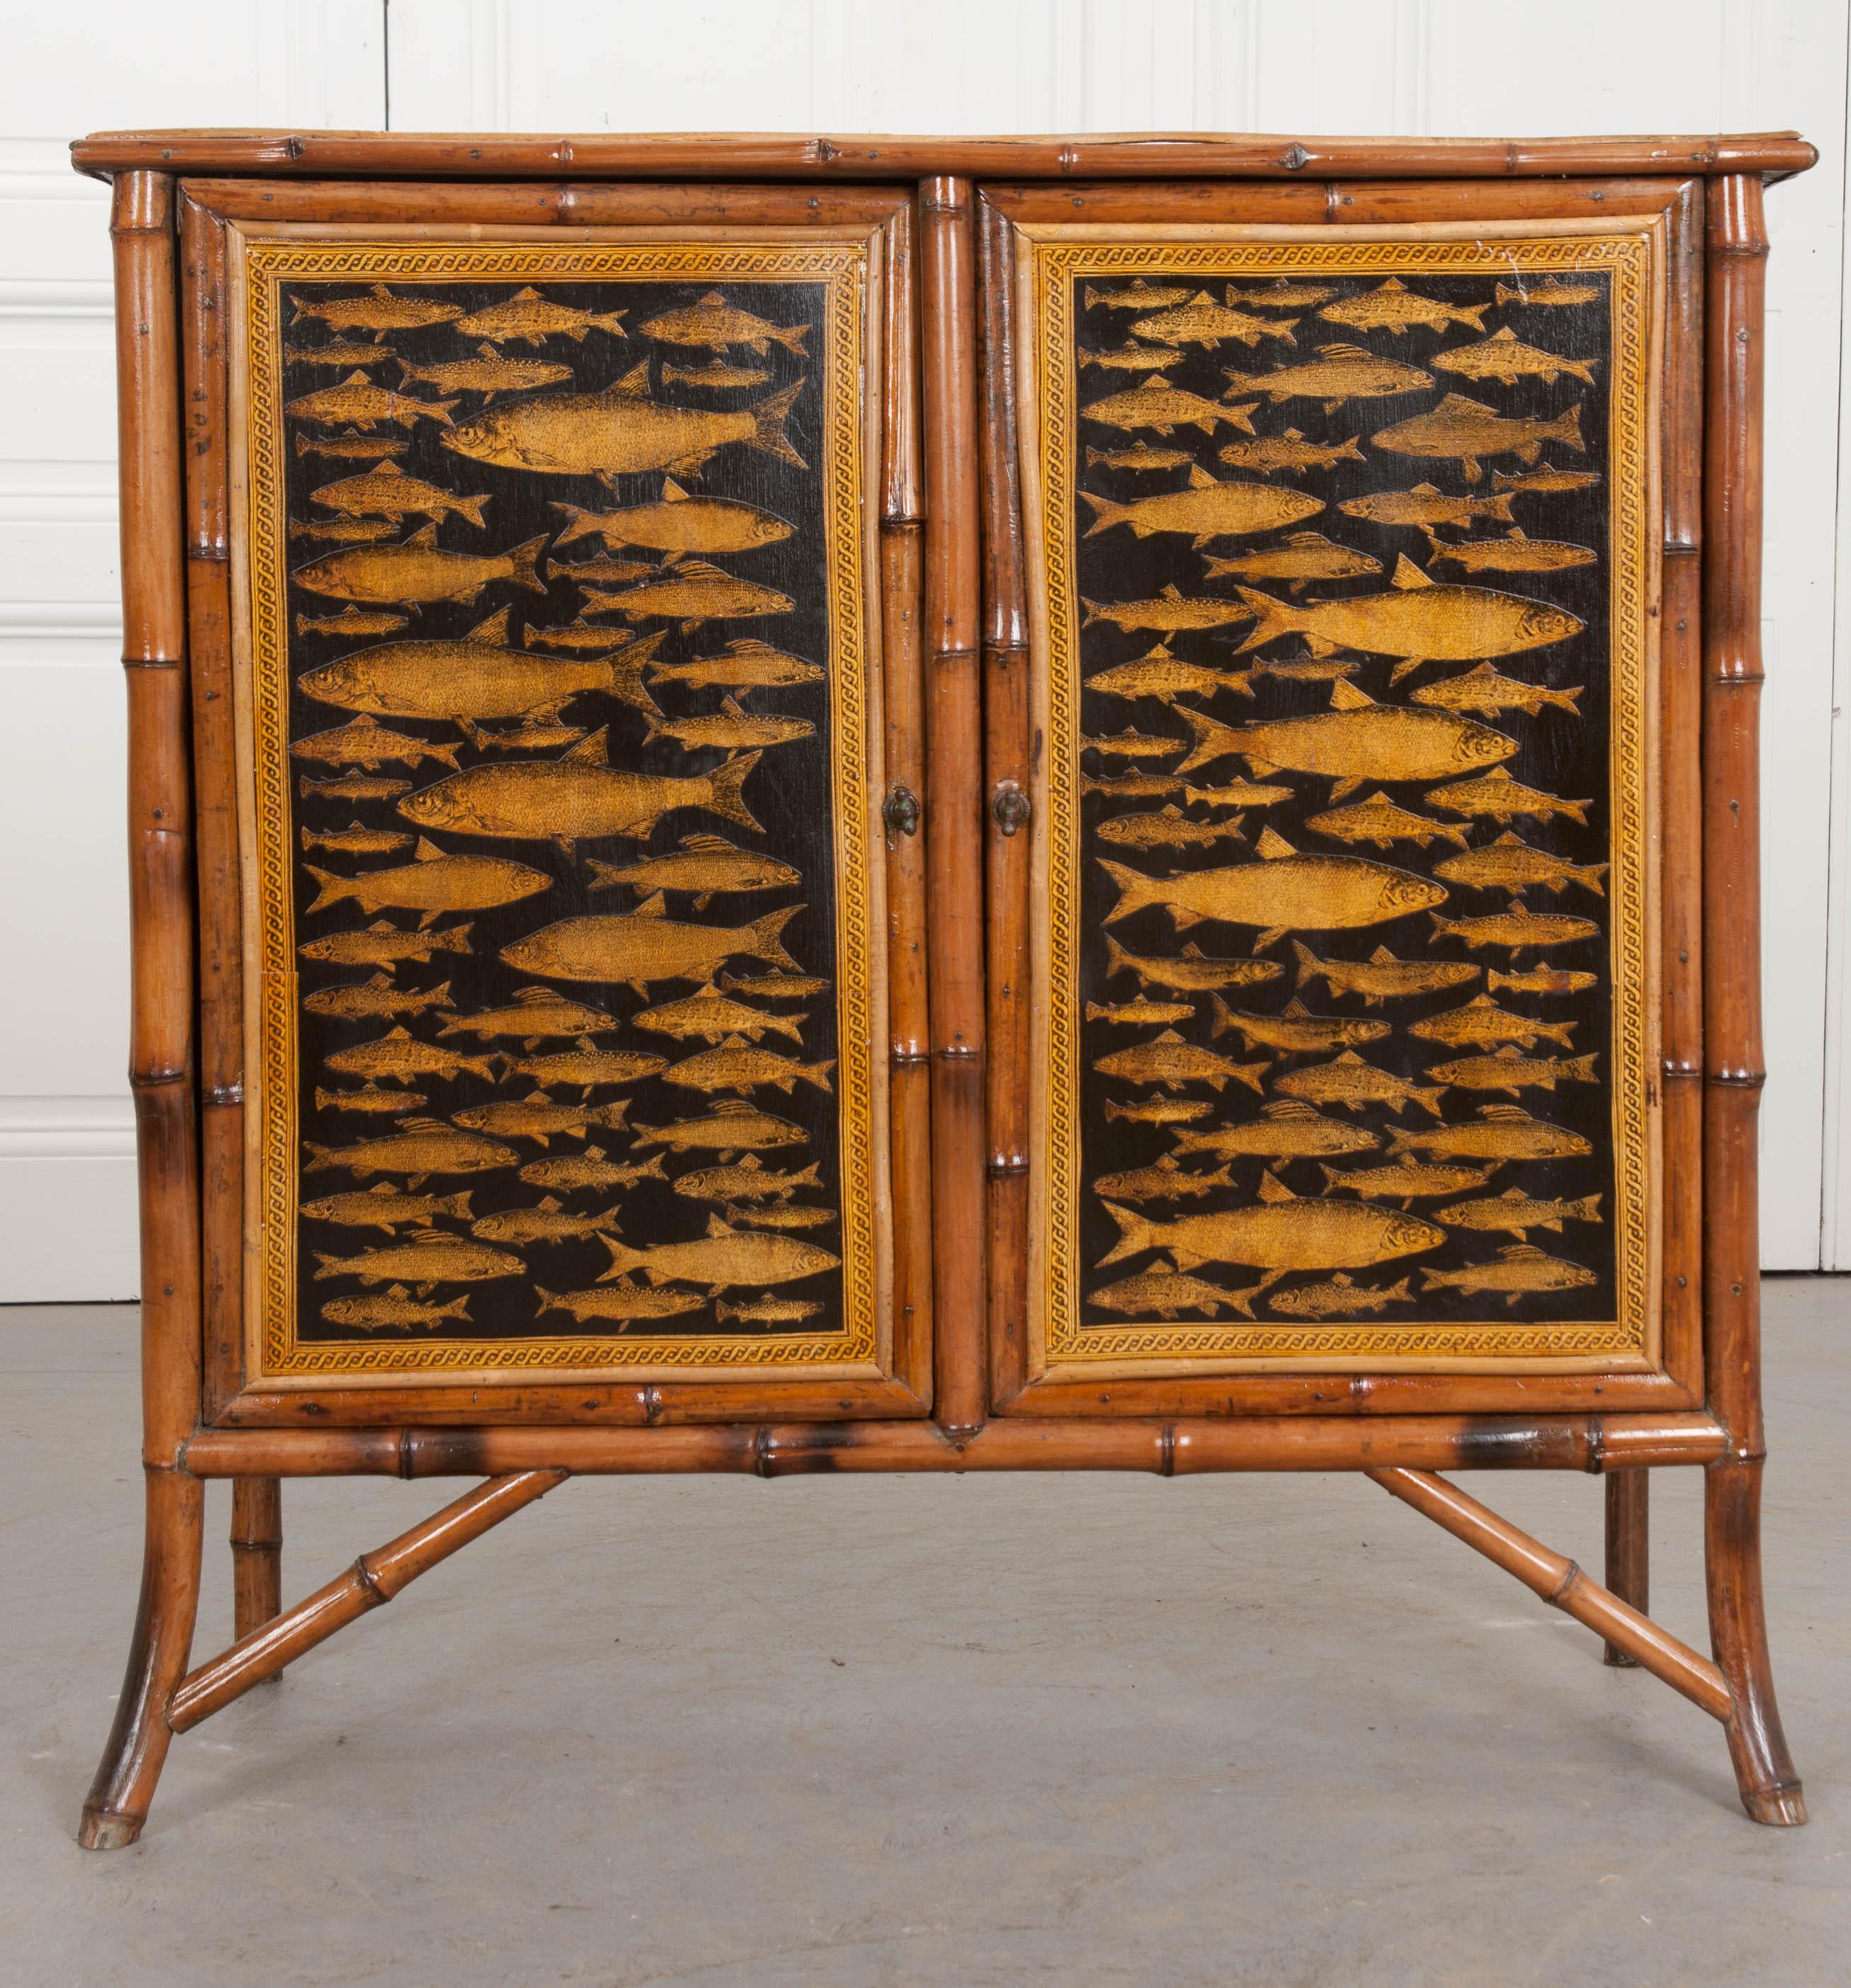 A wonderful 19th century English bamboo cabinet with two doors and recently découpaged fish front, sides and top. The doors latch closed before an interior storage compartment. It is outfitted with two fixed shelves. The cabinet is sized wonderfully